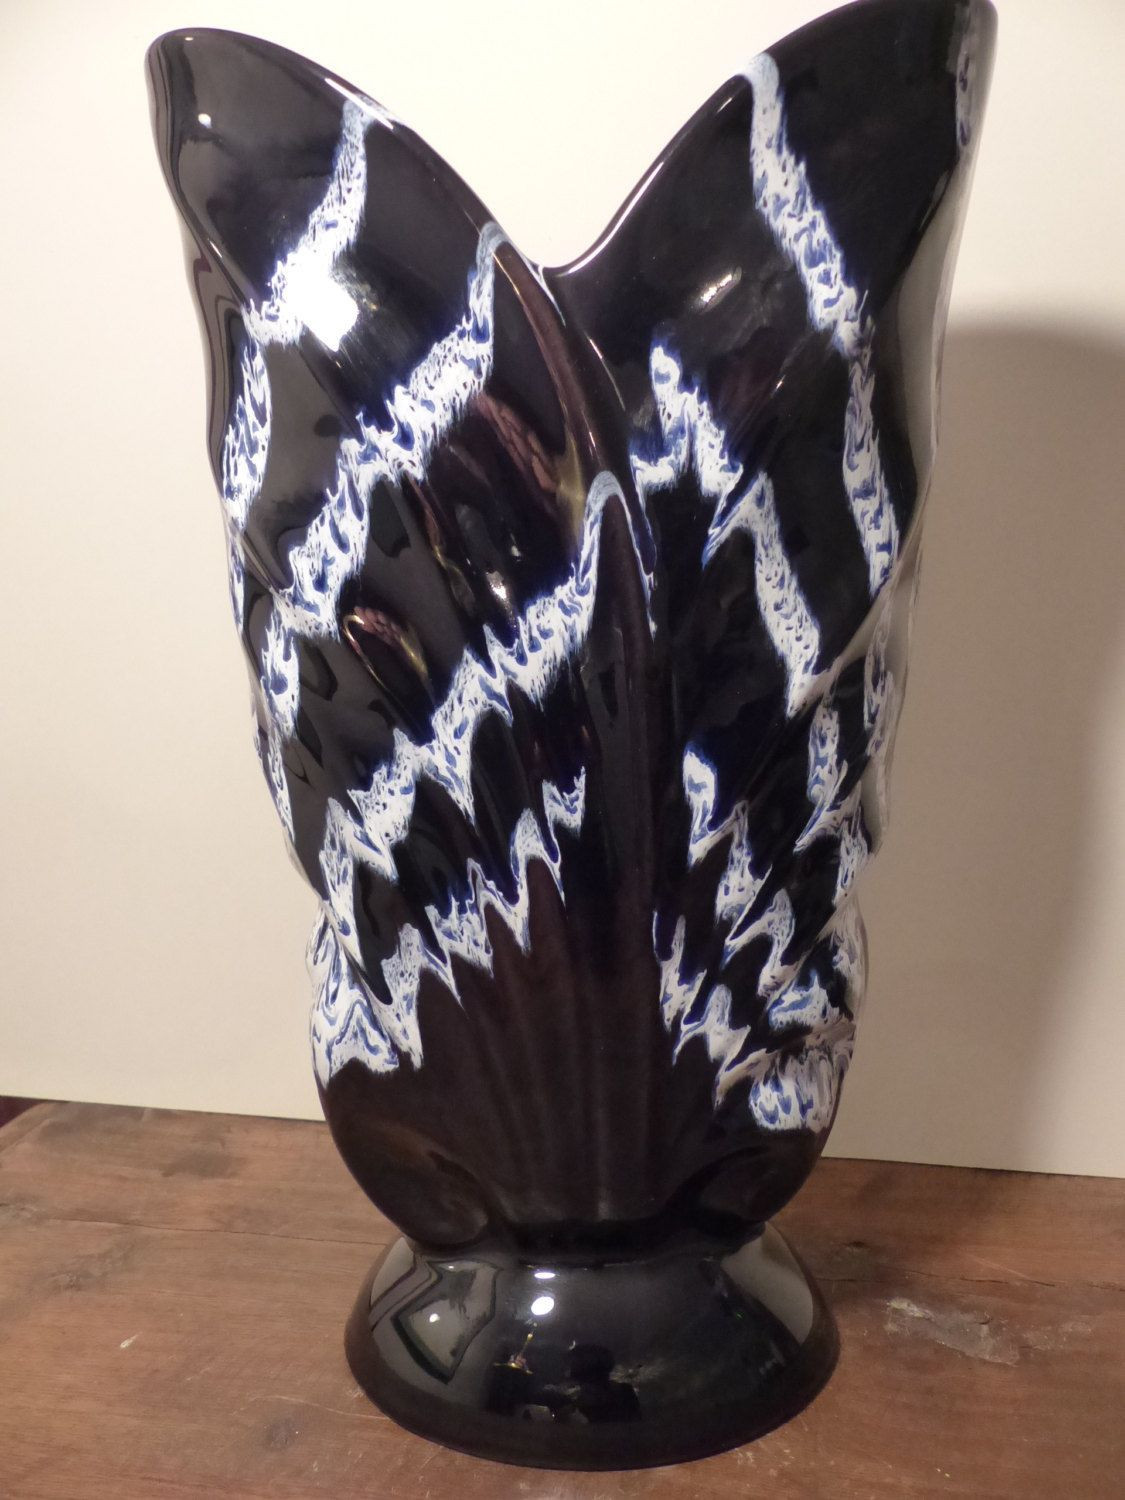 24 Fabulous Hall Pottery Vase 2024 free download hall pottery vase of collection of granite flower vases vases artificial plants with regard to granite flower vases photos blue mountain pottery cobalt blue granite tulip vase white of colle